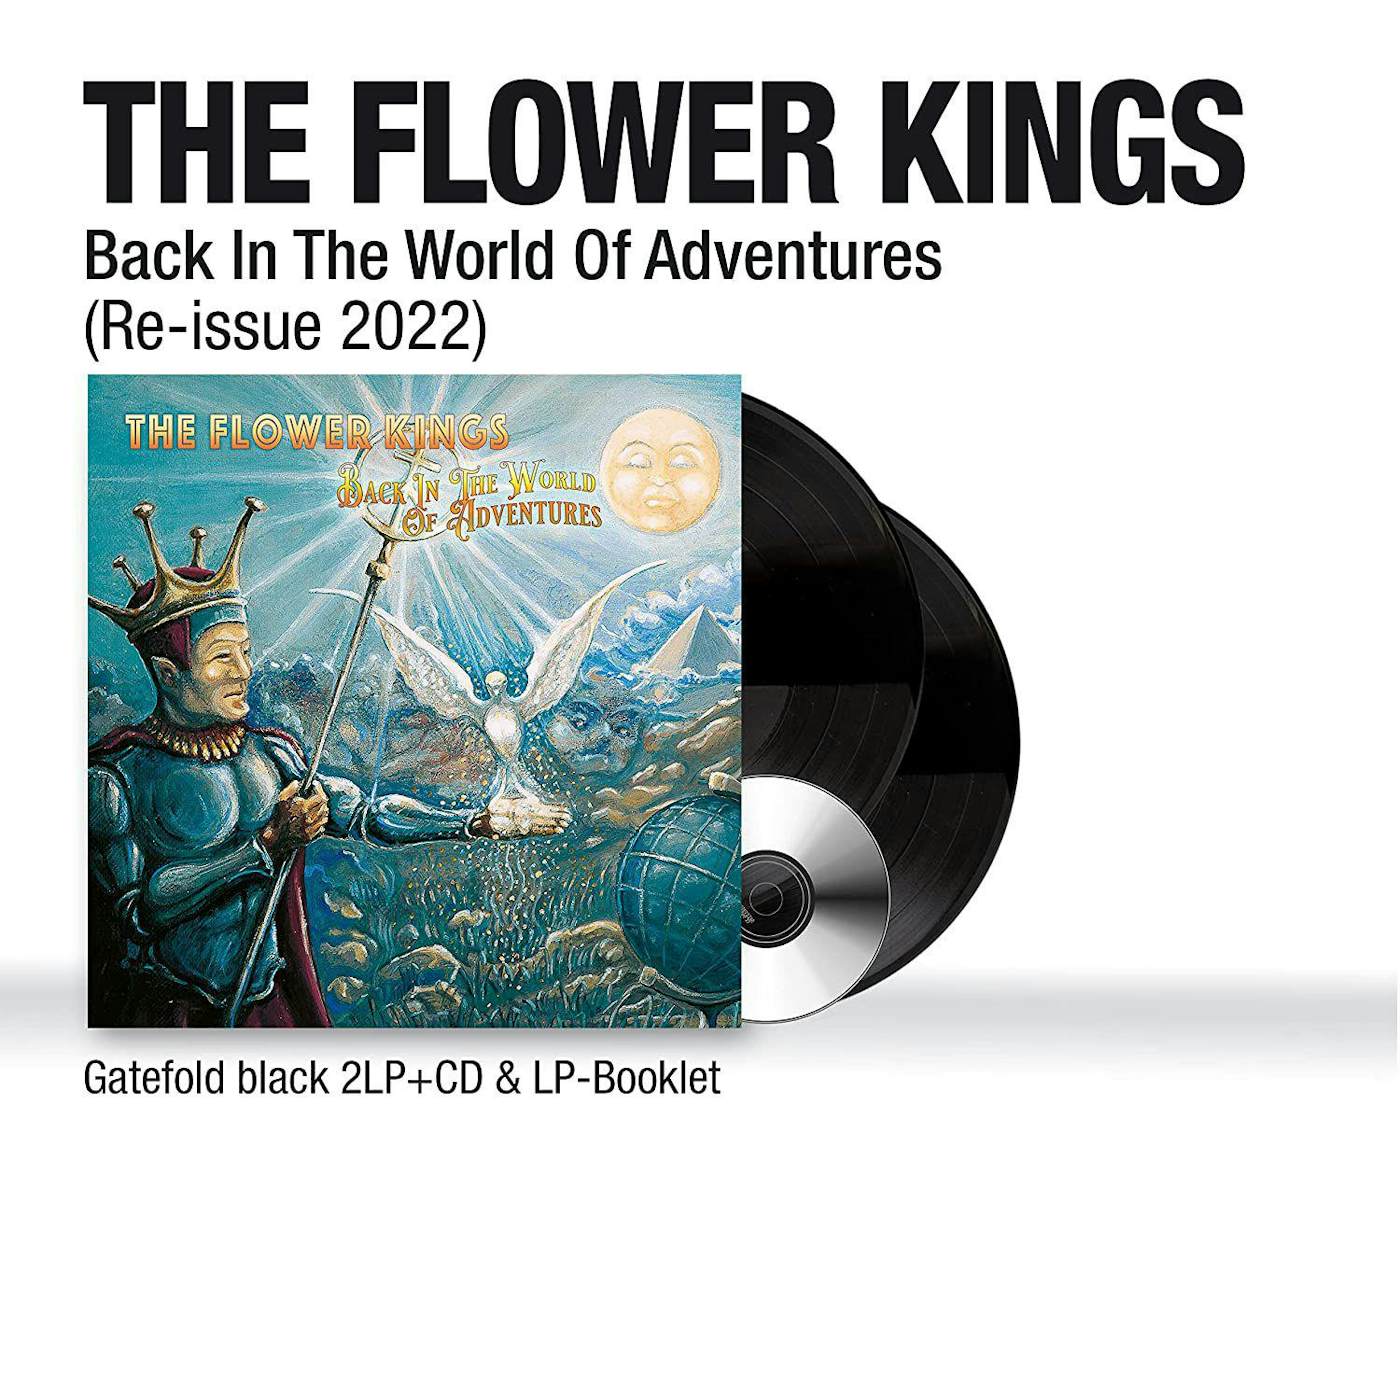 The Flower Kings Back In The World Of Adventures (RE-ISSUE 2022) Vinyl Record